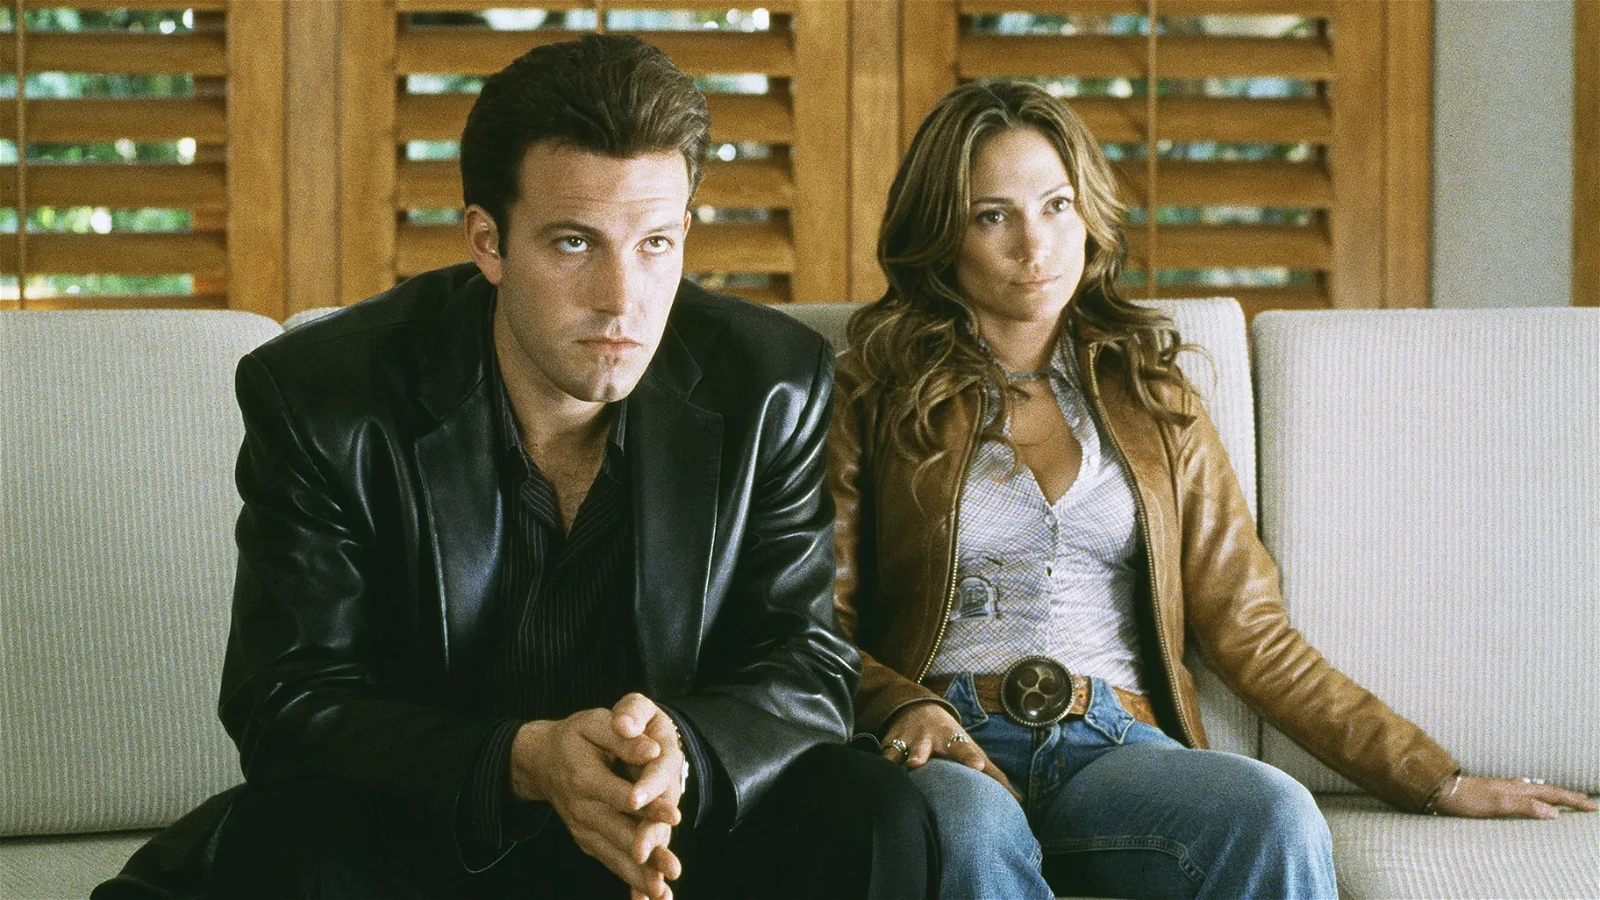 Ben Affleck and Jennifer Lopez in a scene from Gigli